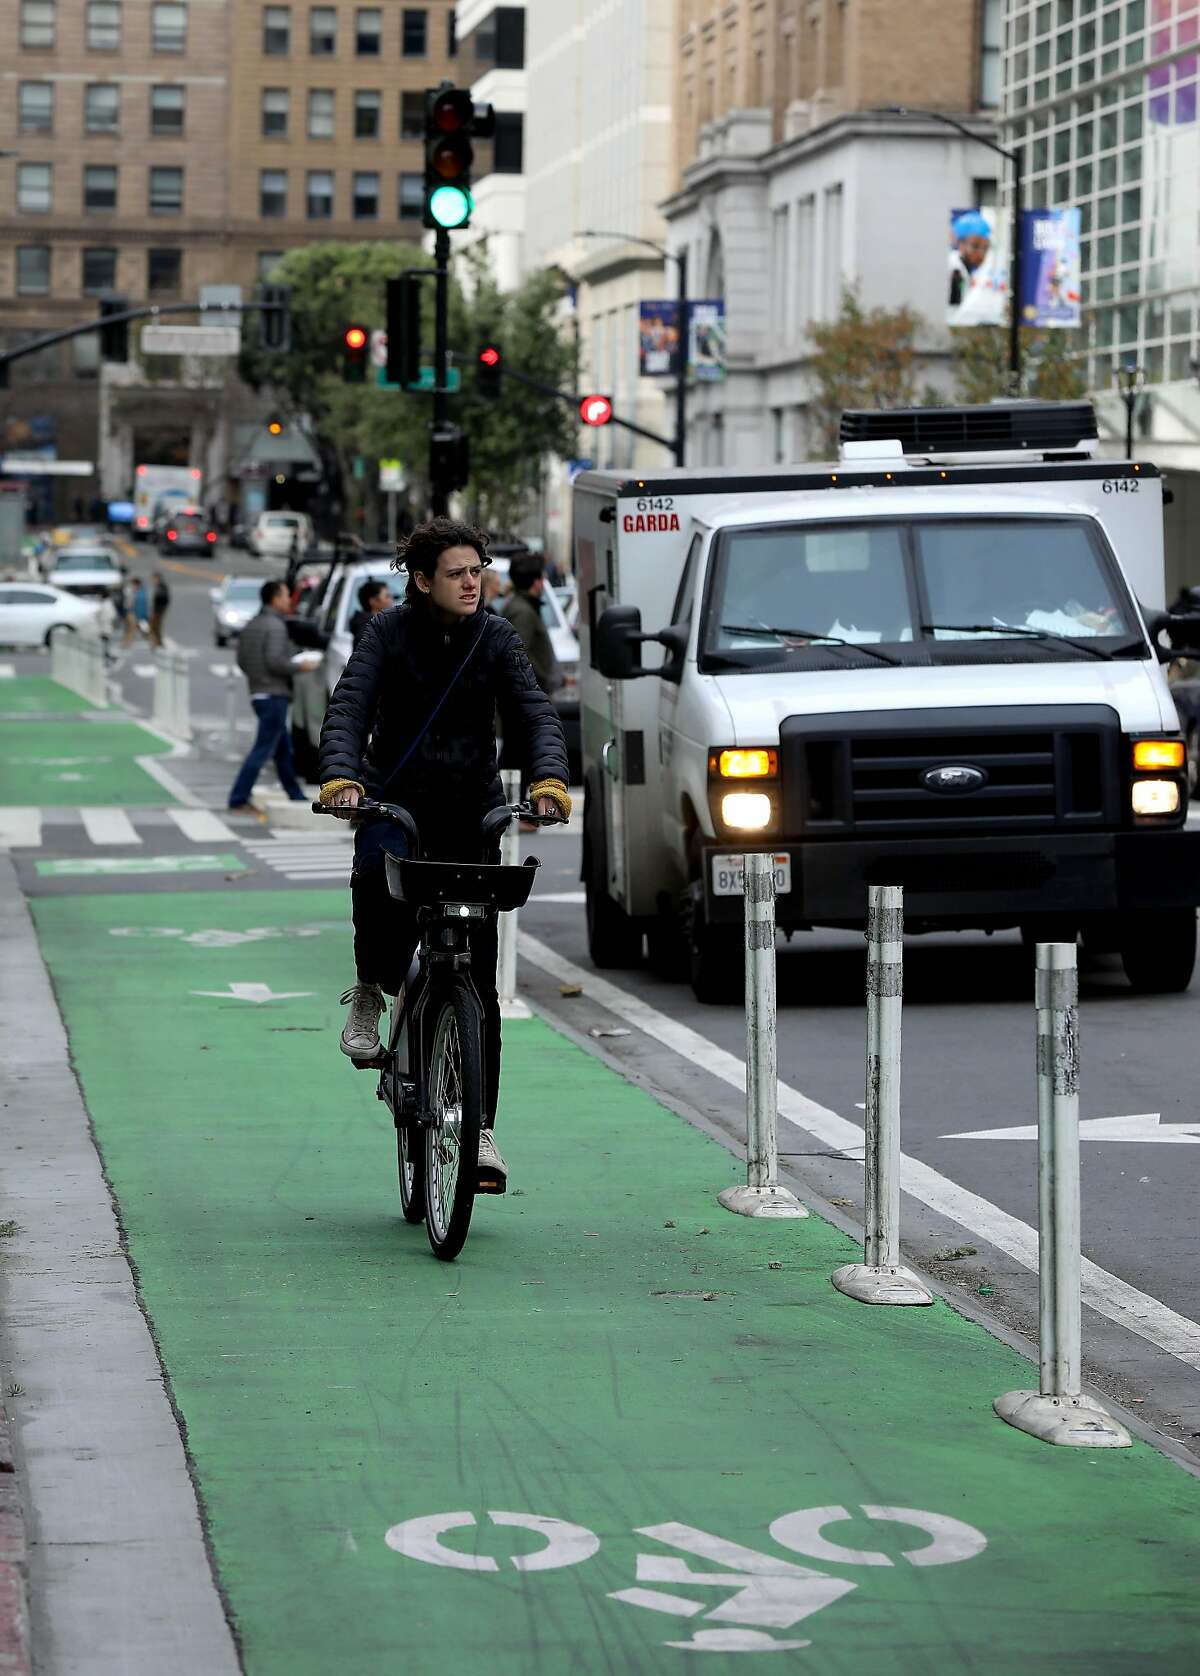 A cyclist travels in the bike lane near Howard and Second, in San Francisco, Calif., on Wednesday, January 15, 2020.